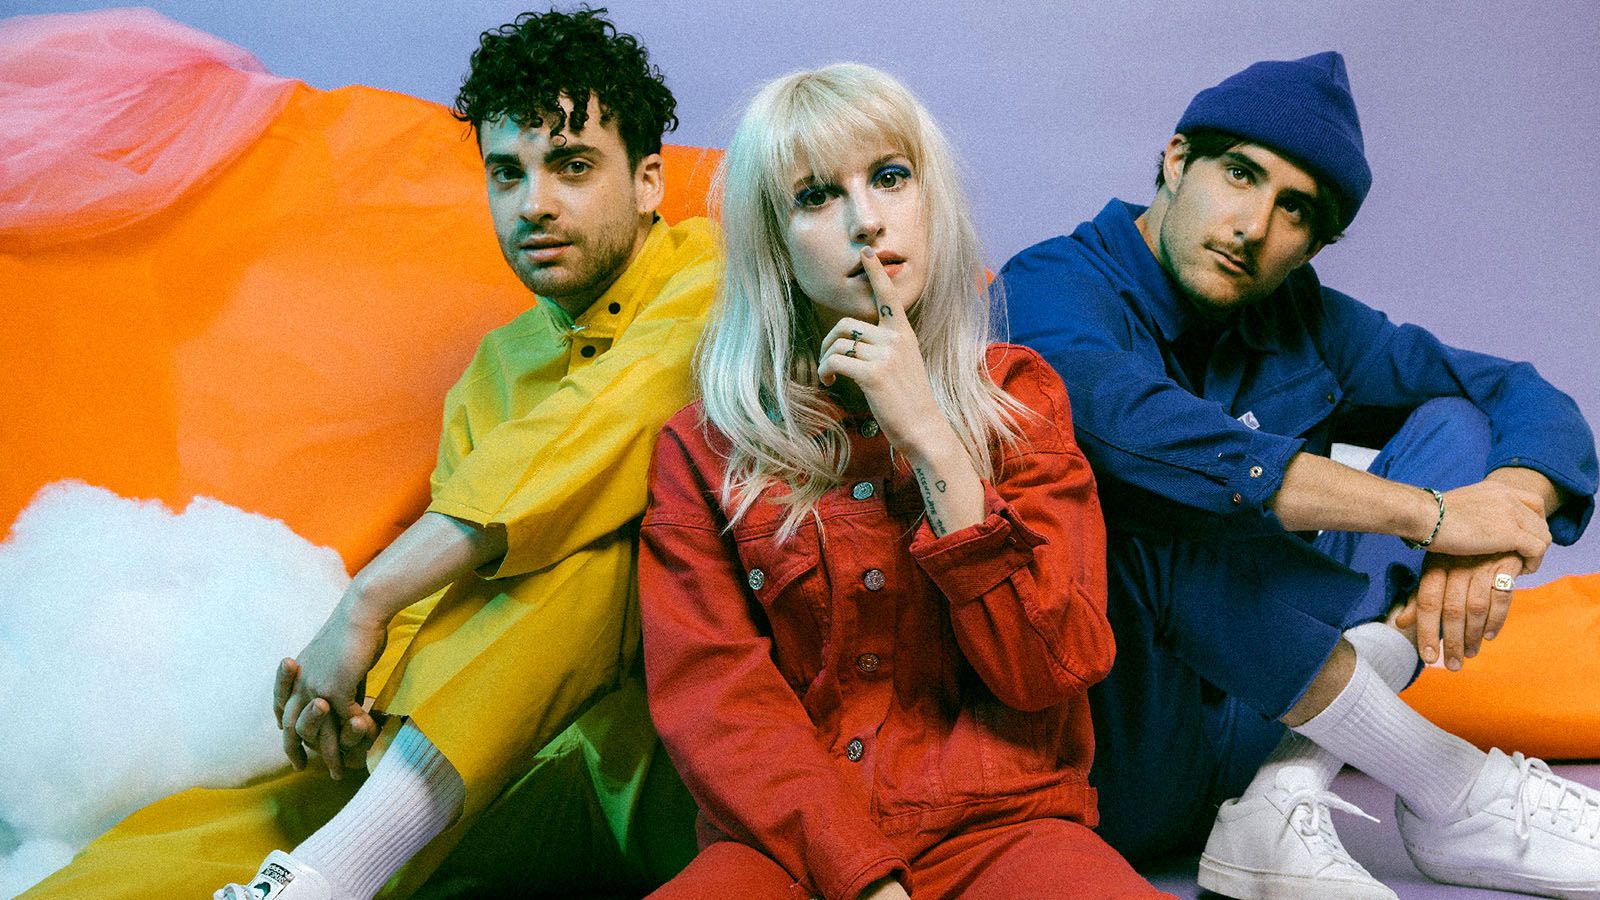 Paramore will visit some regional shows in 2023 in support of their upcoming album.